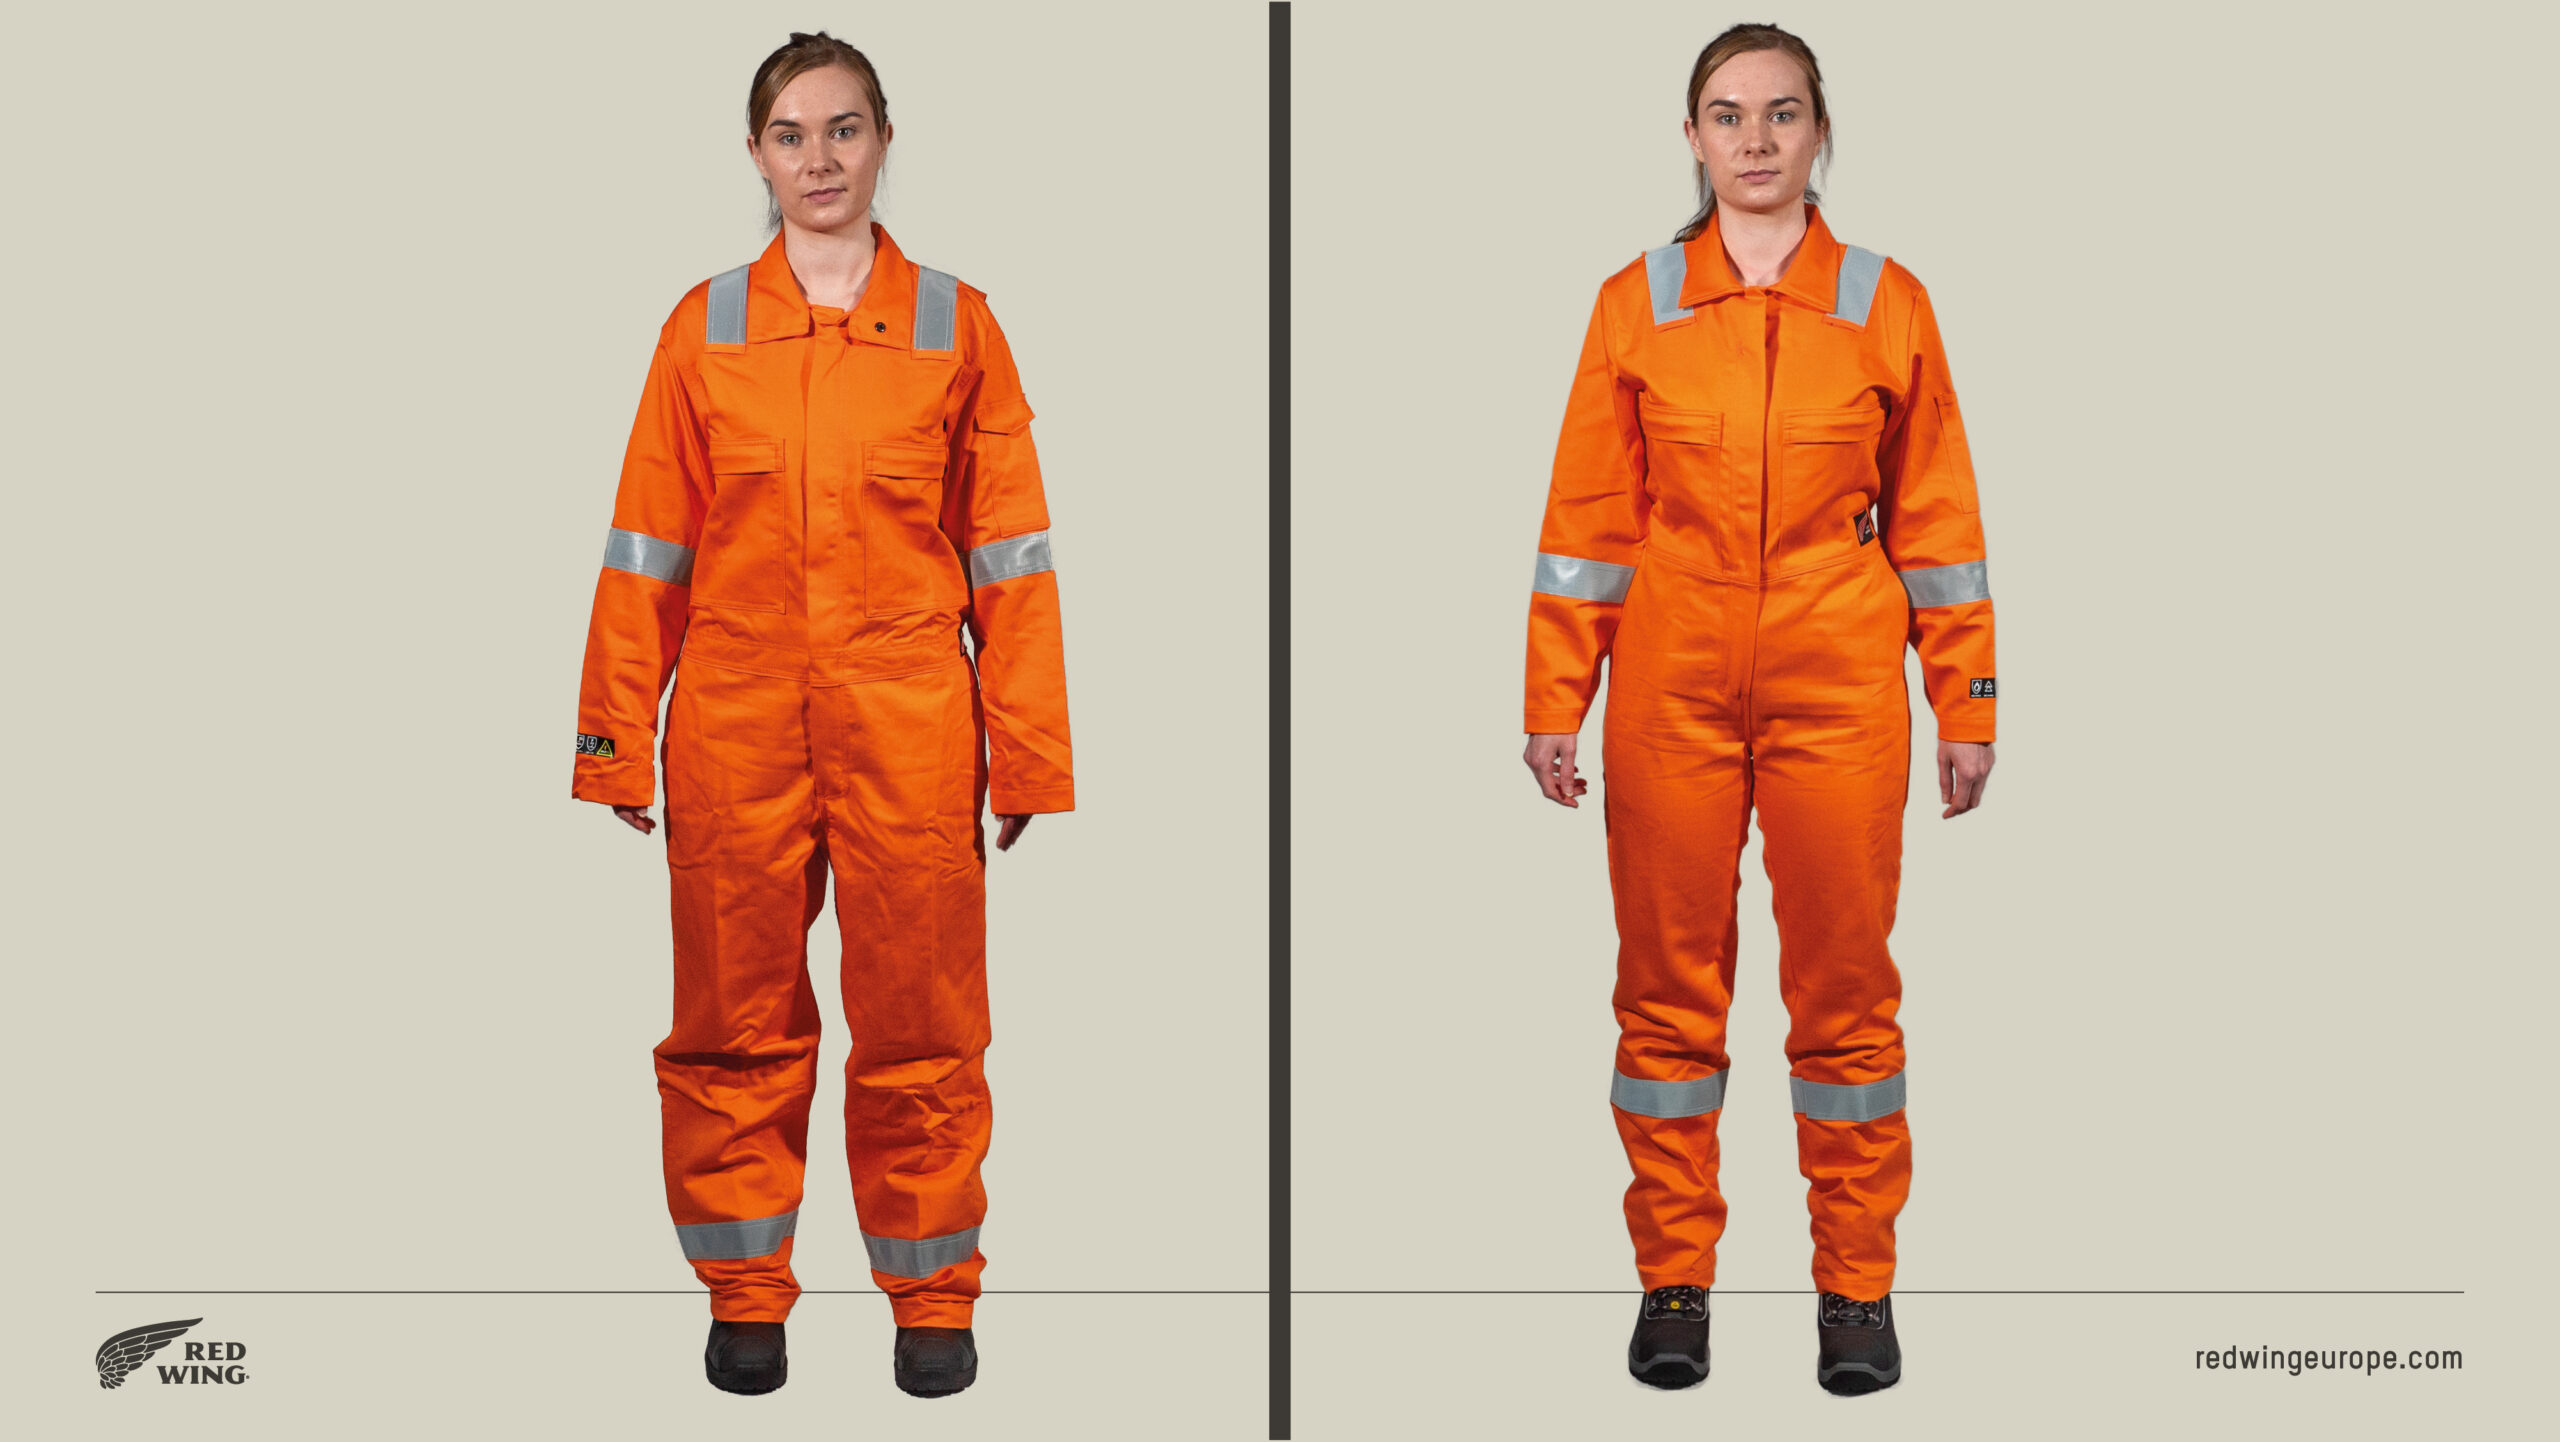 MEMBER NEWS: Red Wing in drive to improve safety standards for women’s offshore PPE